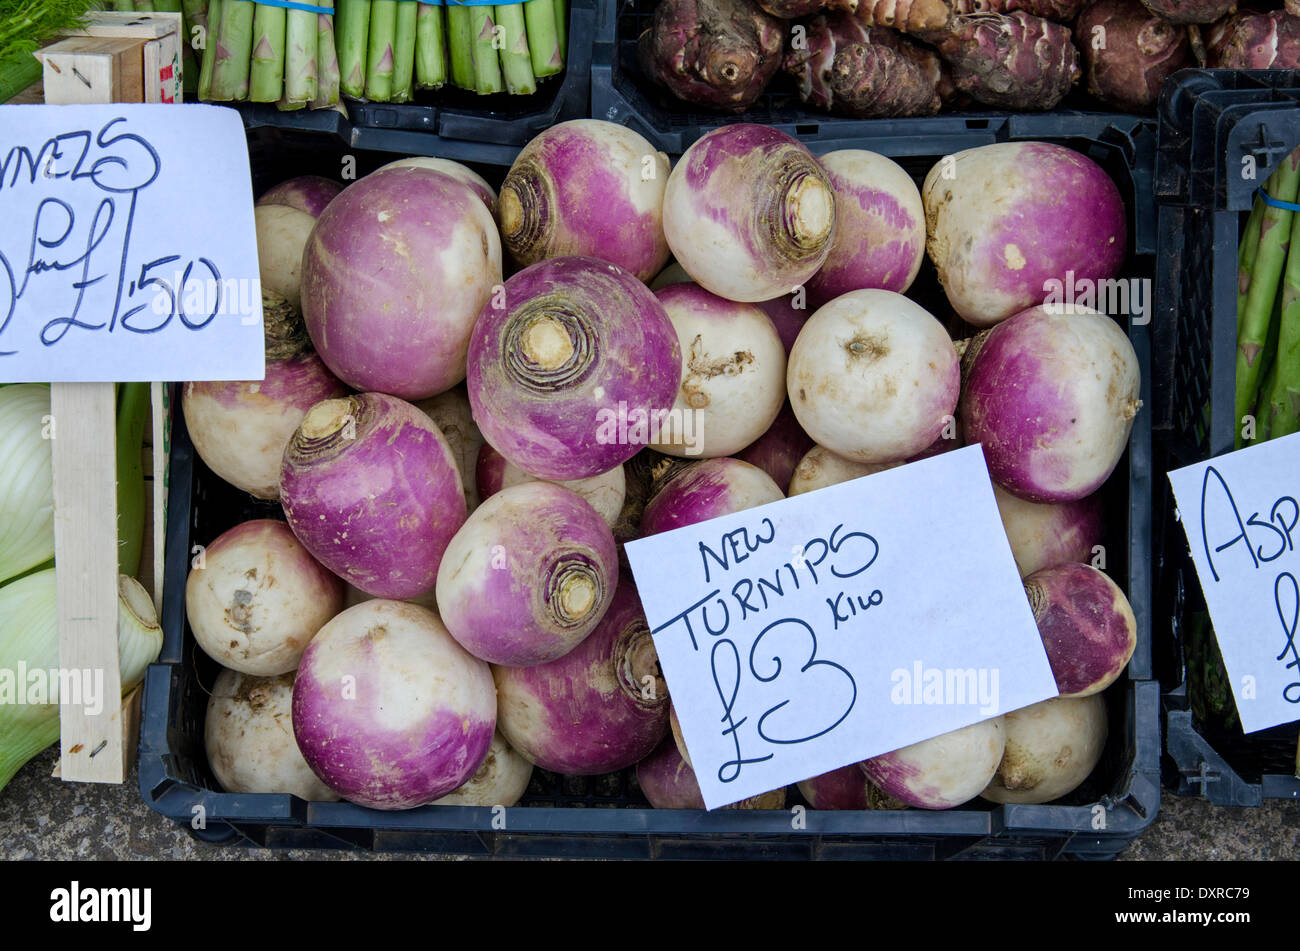 New turnips for sale on an outdoor market stall in the Grassmarket, Edinburgh. Stock Photo